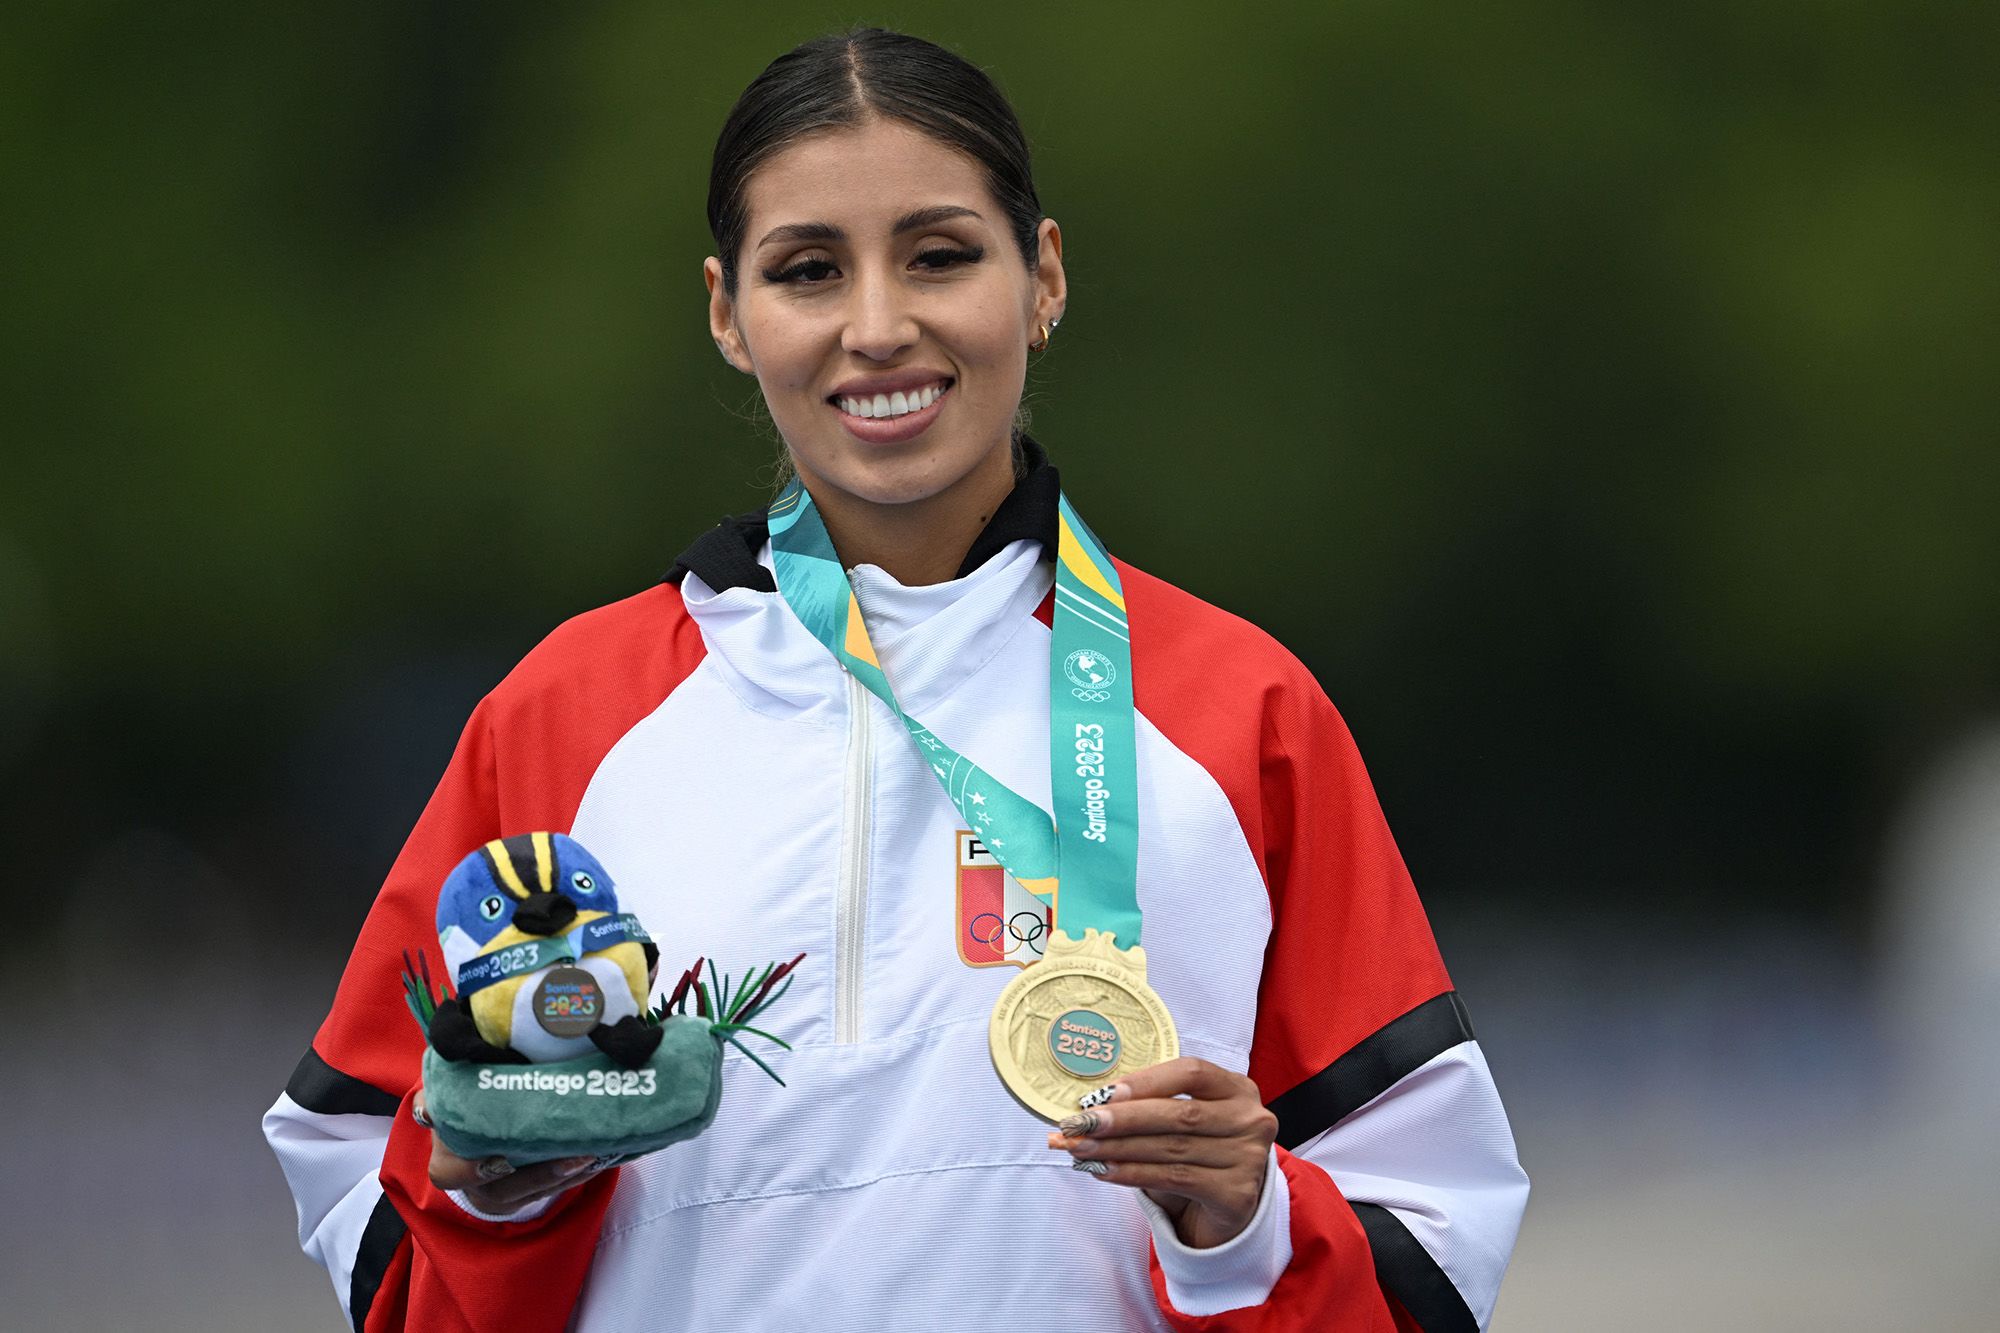 Panam Sports SANTIAGO 2023 PRESENTS THE OFFICIAL MEDALS OF THE